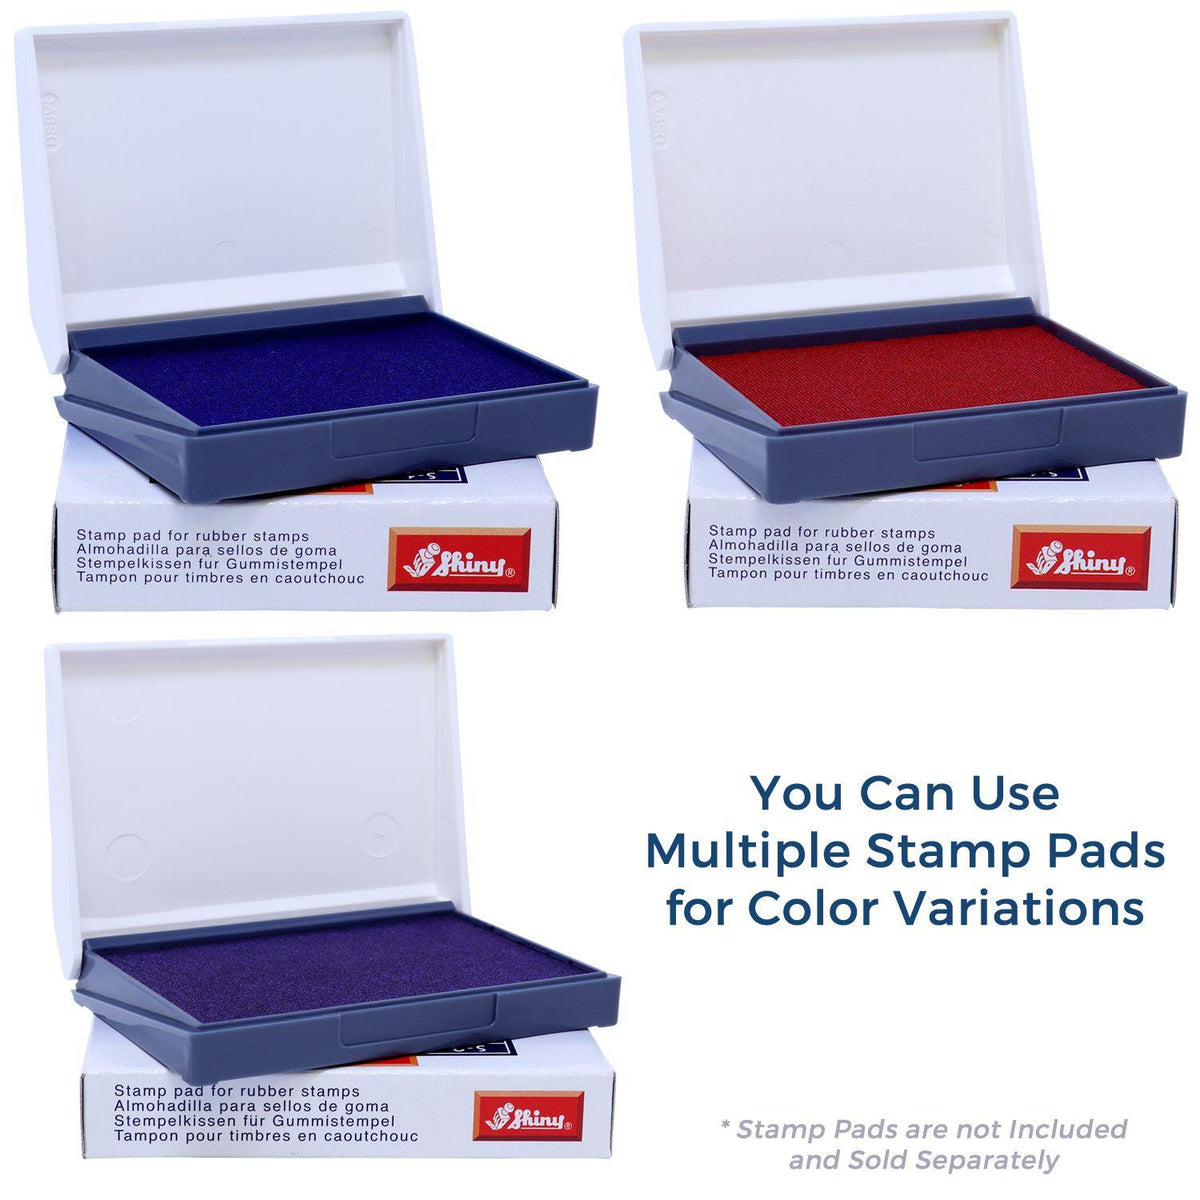 Stamp Pads for Large Duplicado Rubber Stamp Available